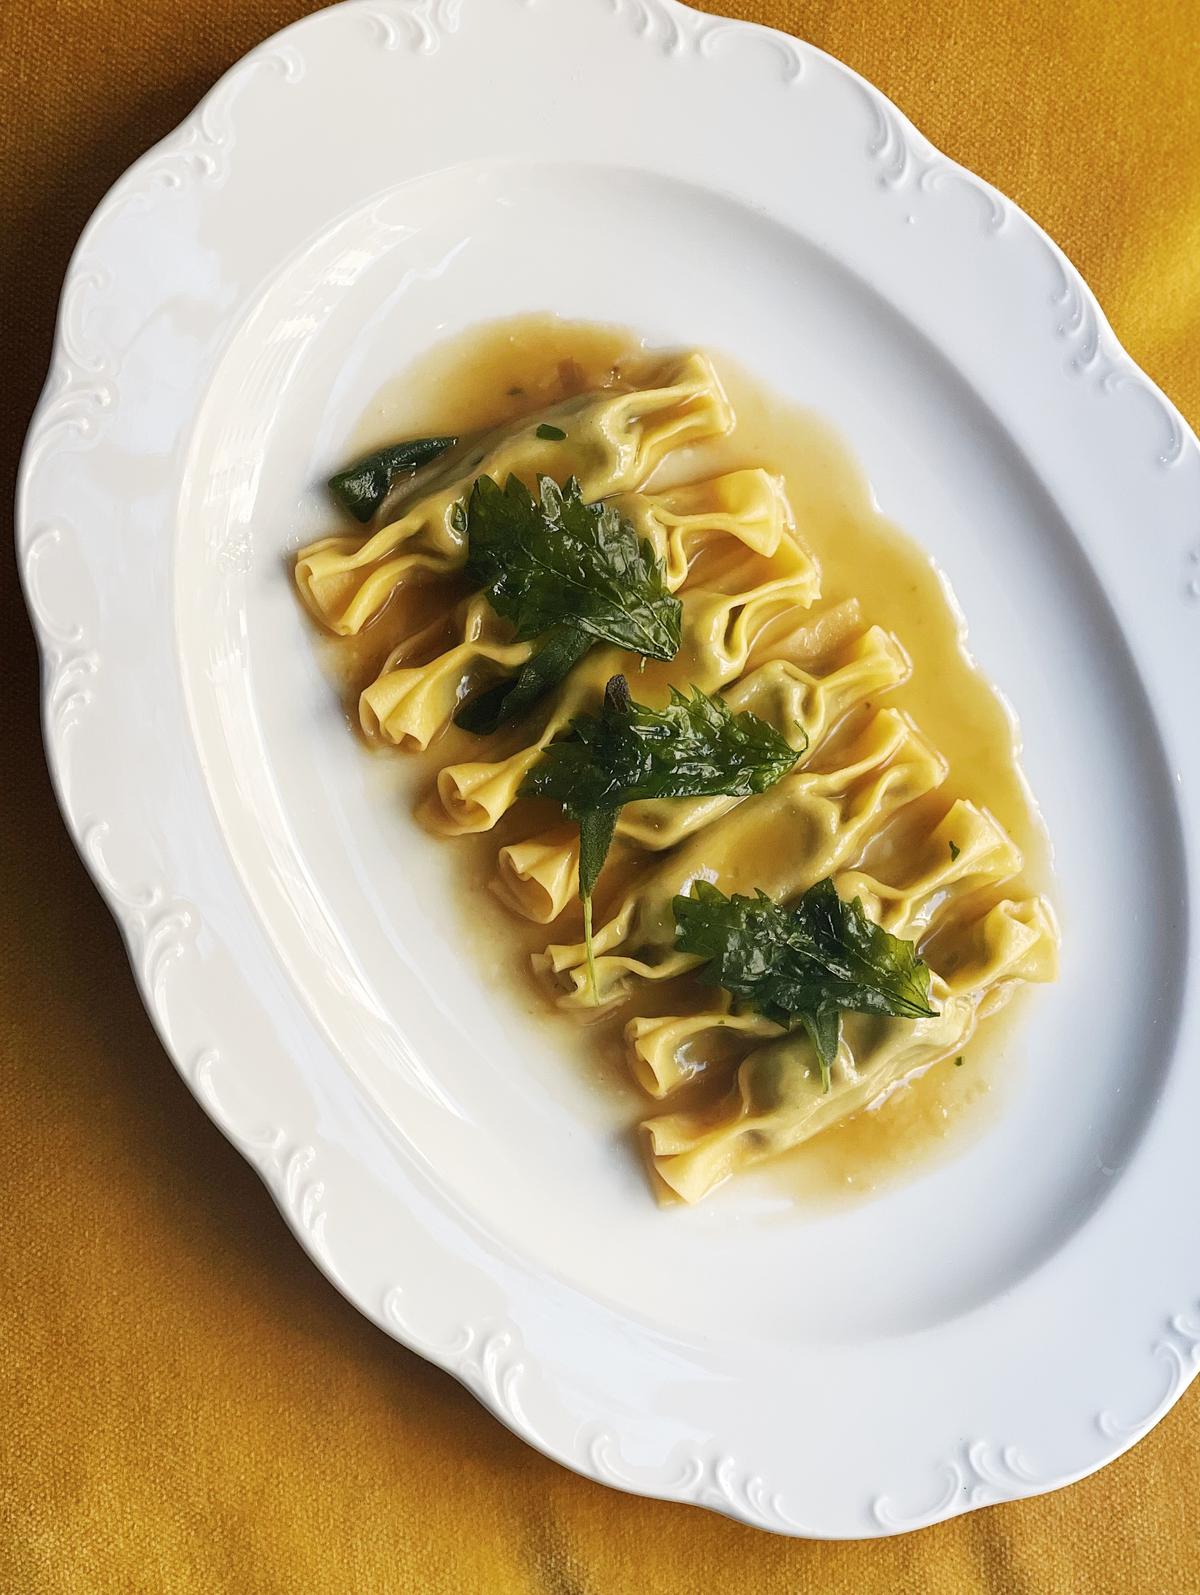 Pasta, such as this wild nettle caramelle, is made in-house. (Lucianna McIntosh)